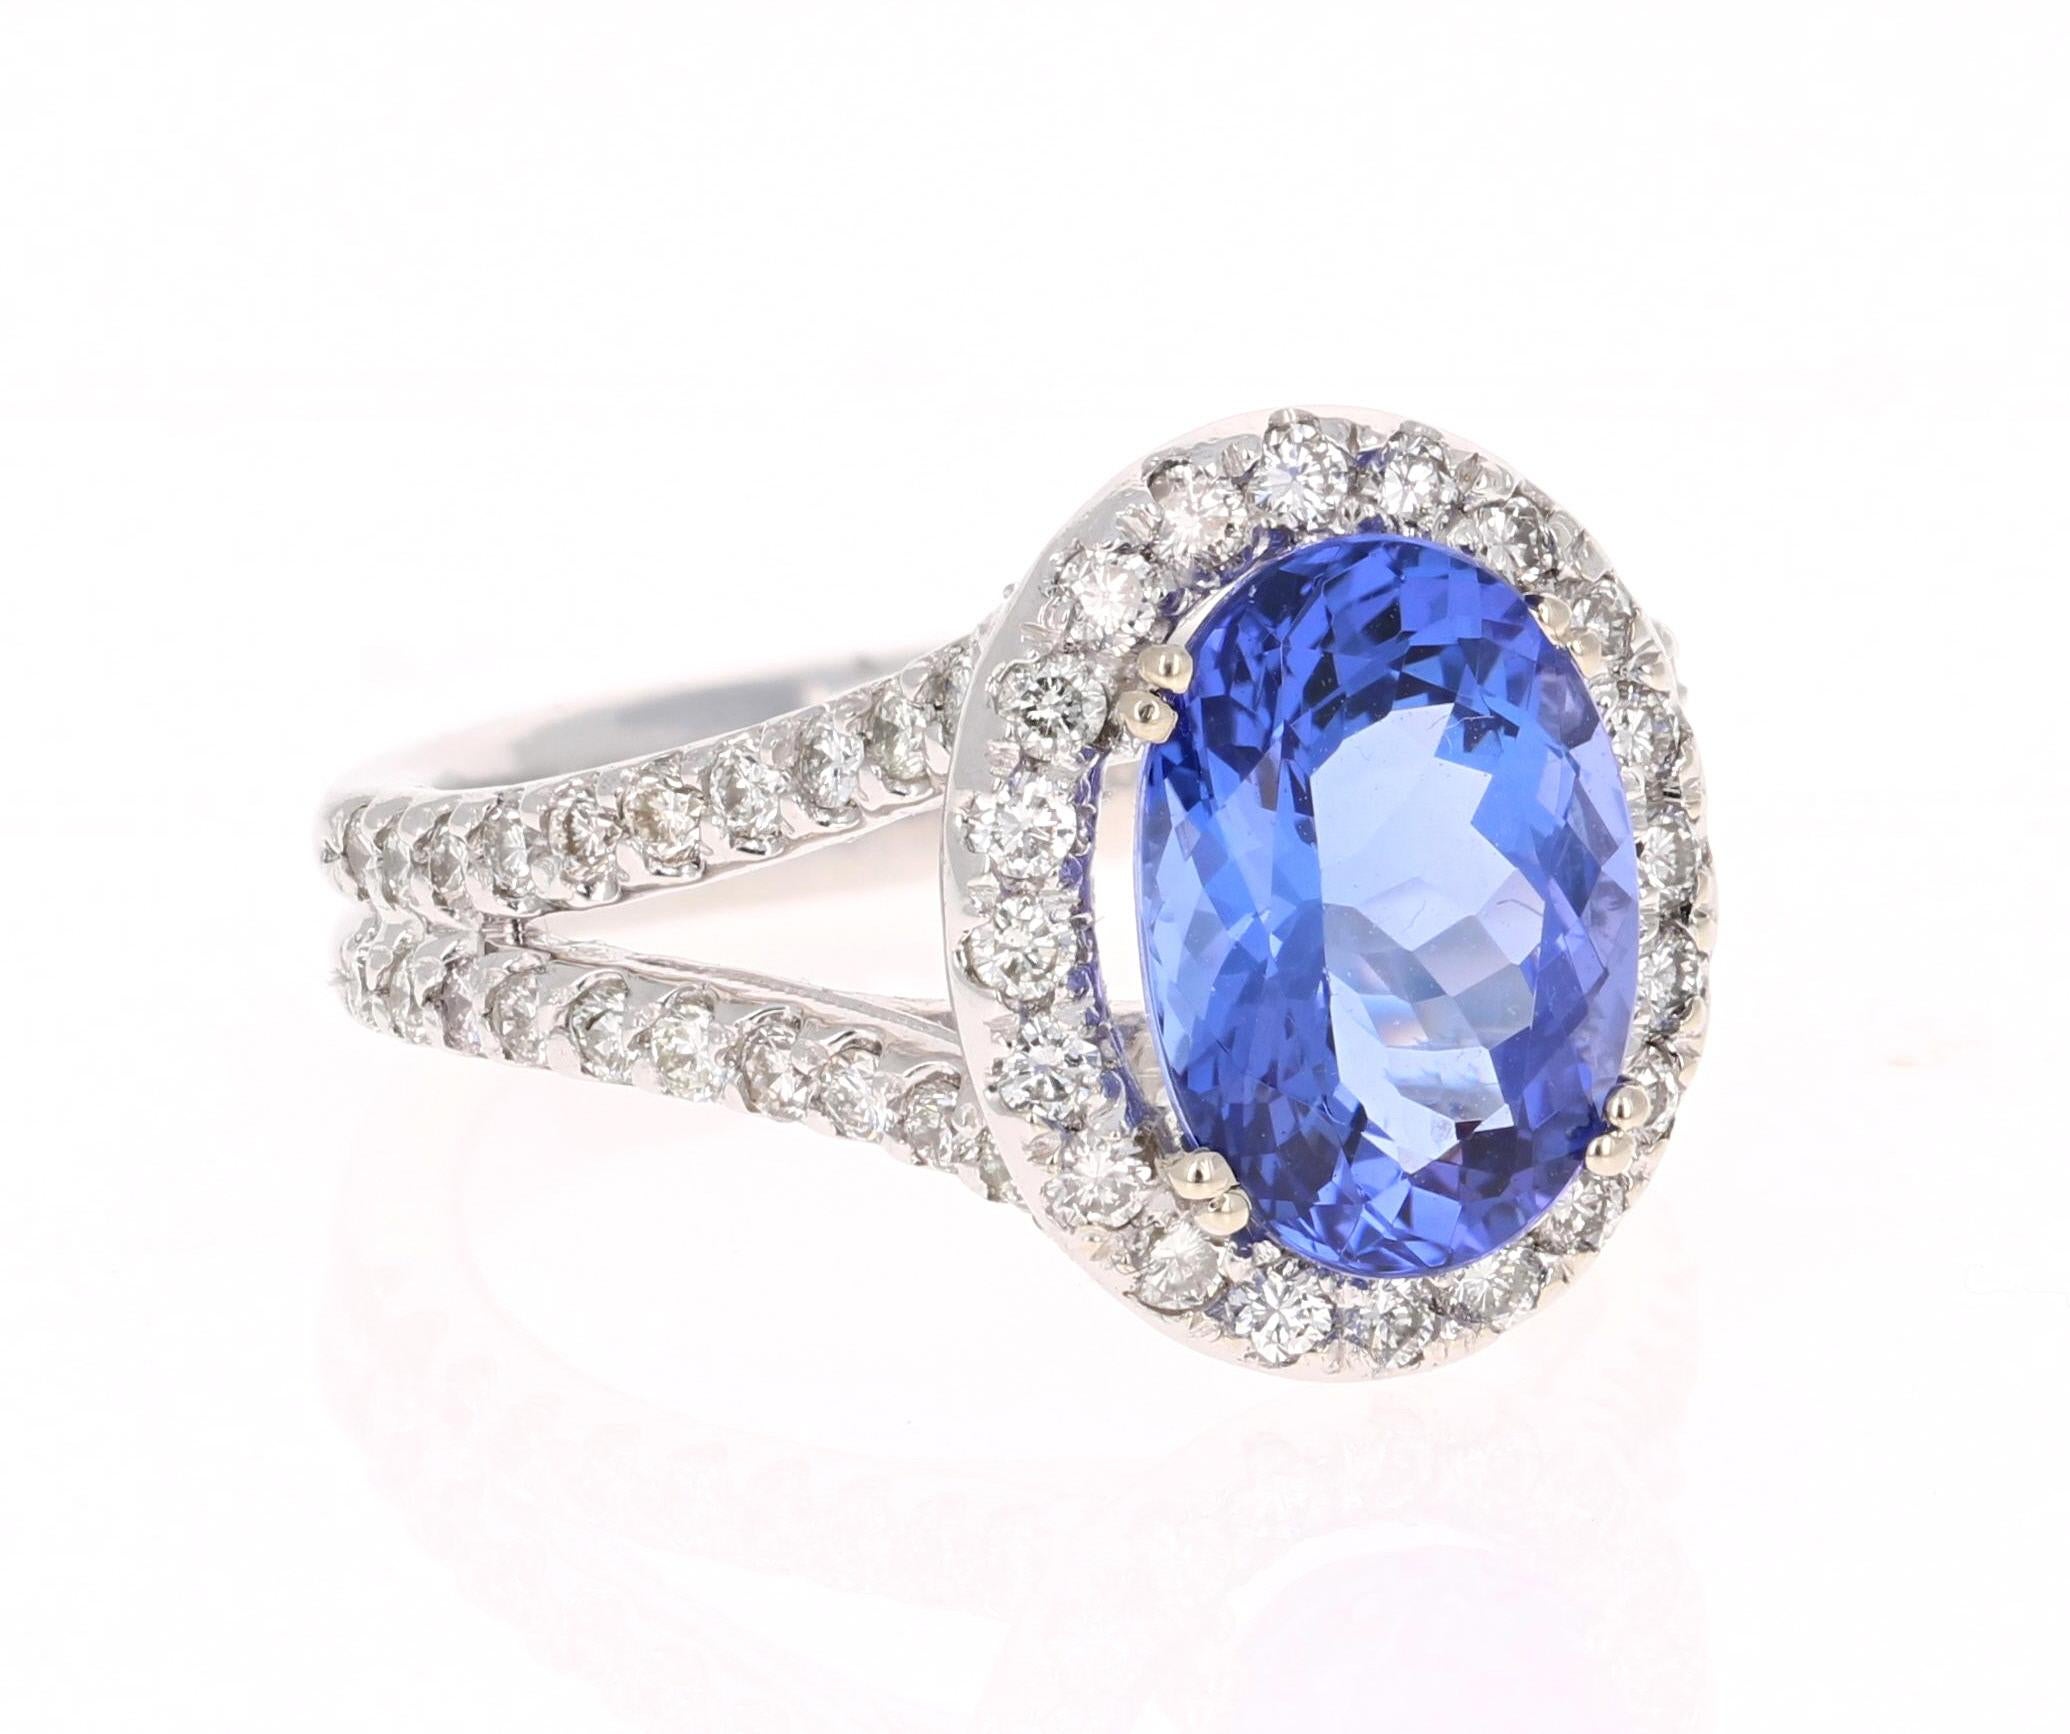 This beautiful ring has a vivid 3.24 Carat Oval Cut Tanzanite. The Tanzanite is surrounded by 60 Round Cut Diamonds that weigh 1.23 carats with a stunning split shank setting. (Clarity: VS2, Color: F)  The total carat weight of the ring is 4.13